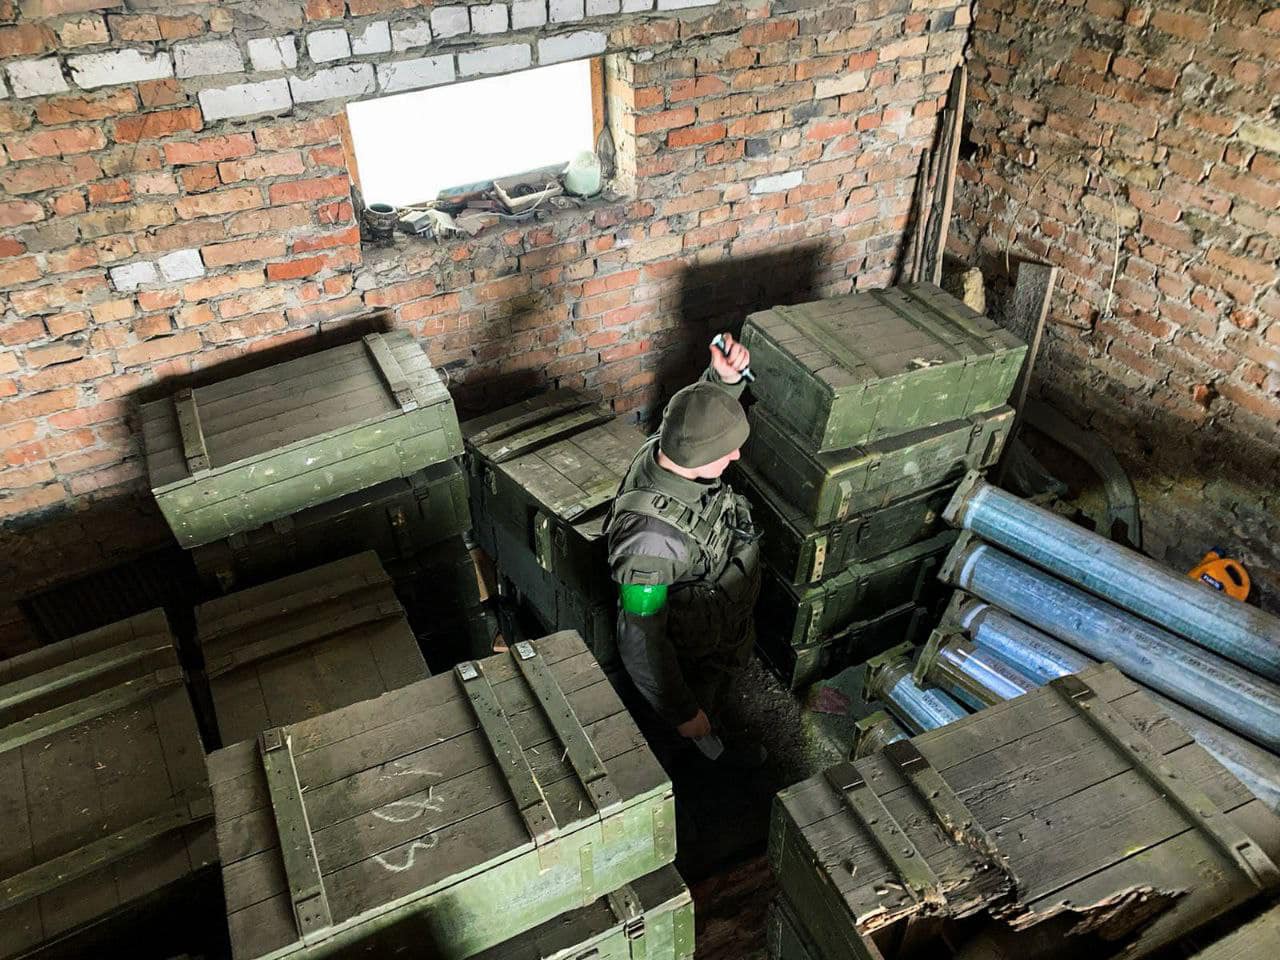 Soldiers of the National Guard of Ukraine in the Kyiv region have found a Russian ammunition warehouse with almost 100 boxes of shells, Defense Express